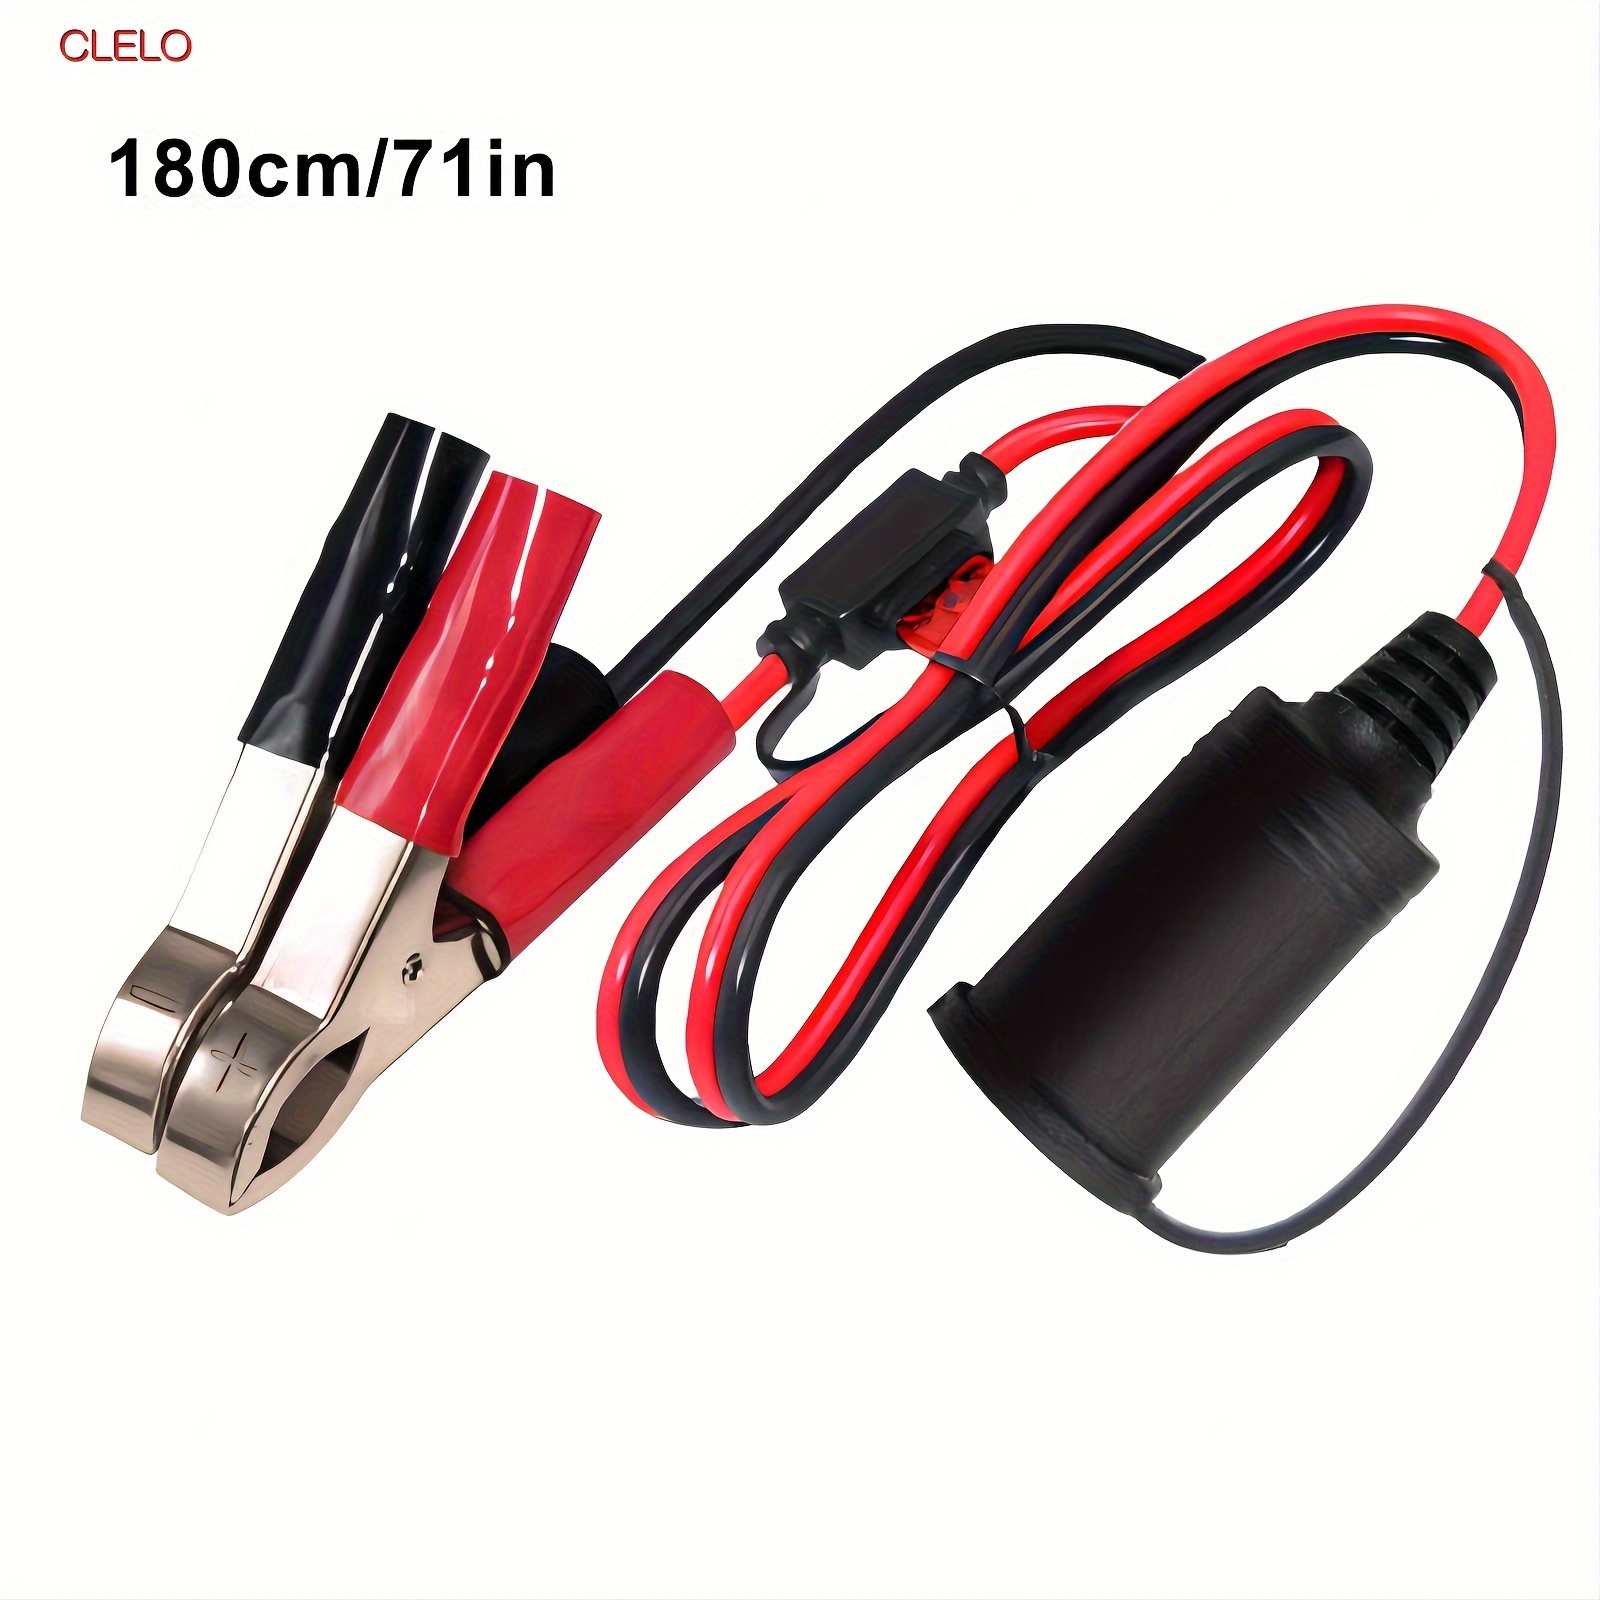 71in cigarette lighter battery adapter female socket to16awg 12v battery alligator clip plug for auto car battery clamp to charge extension cable cord